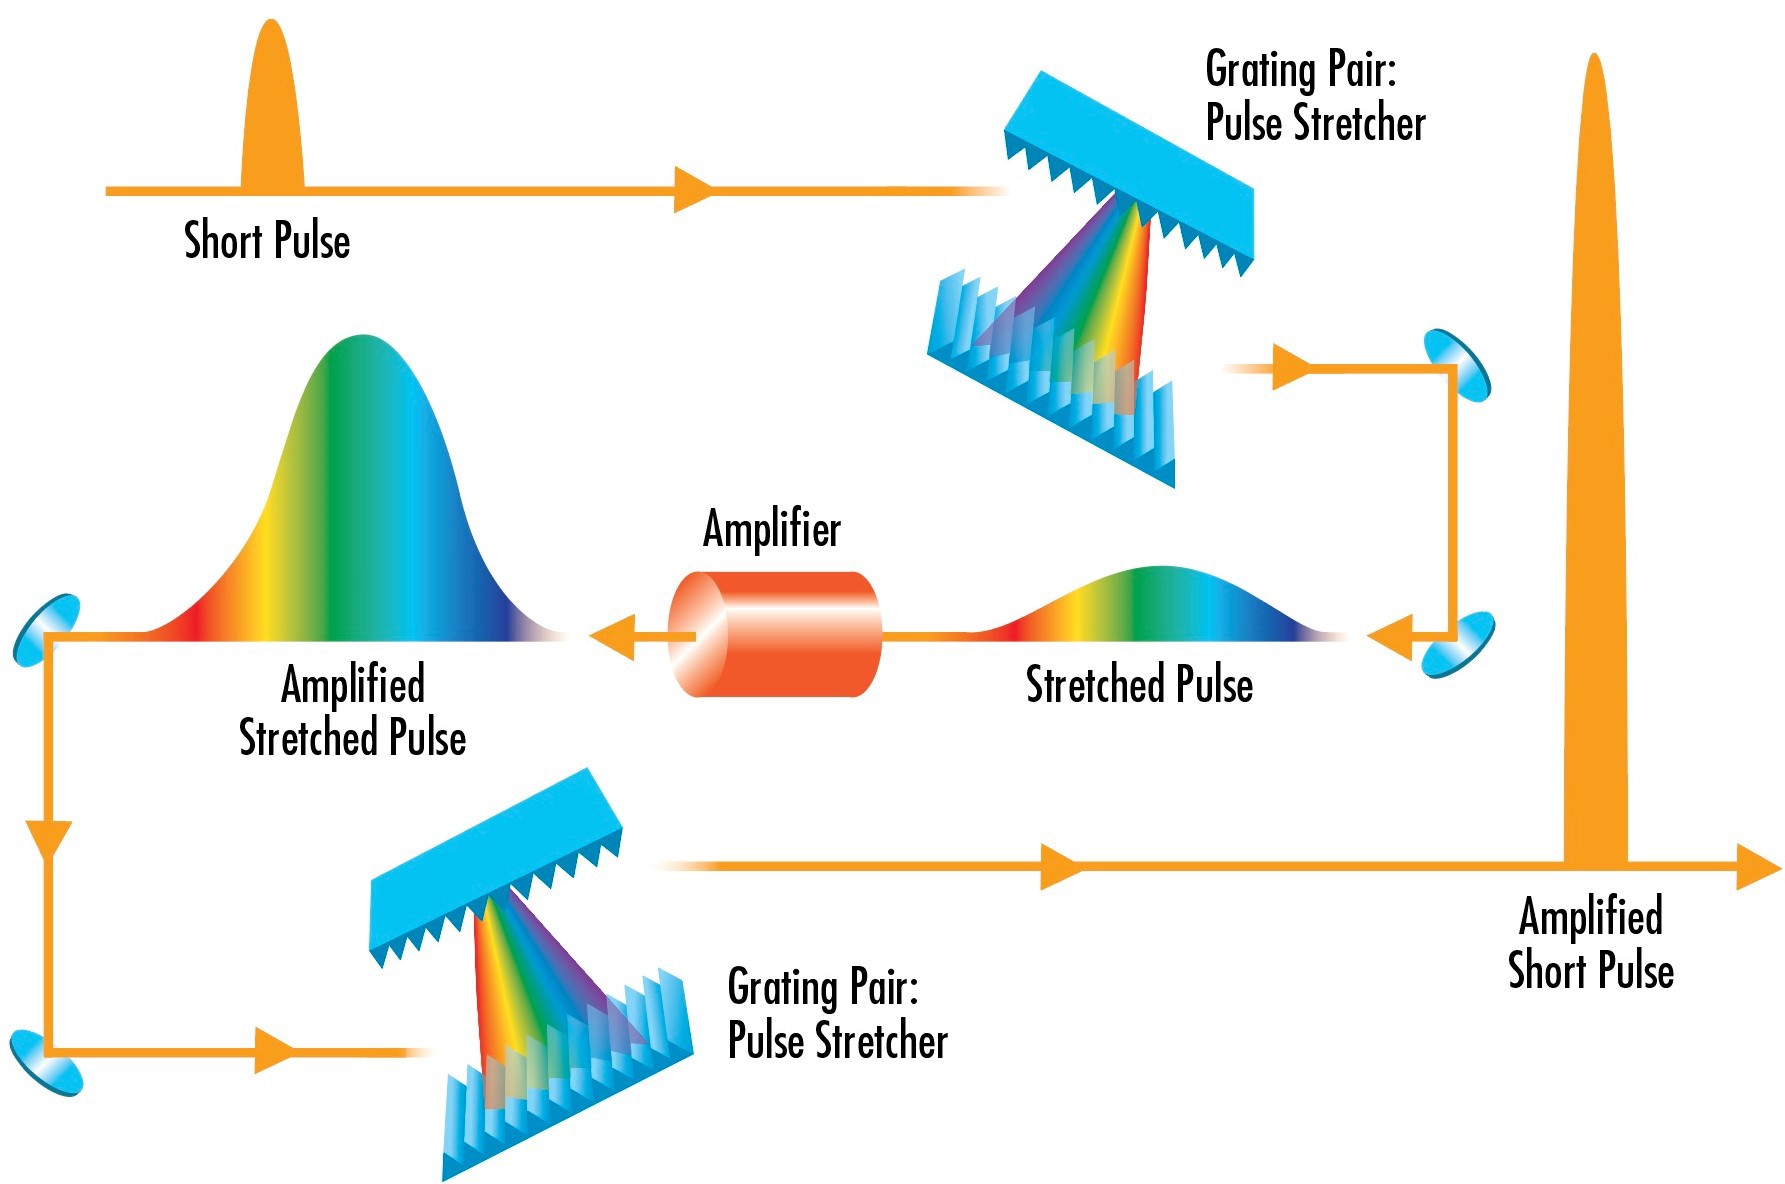 Gratings can be used in pulsed laser systems to both increase pulse duration to prevent laser-induced damage in the system and decrease pulse duration to result in a high-power pulse at the target